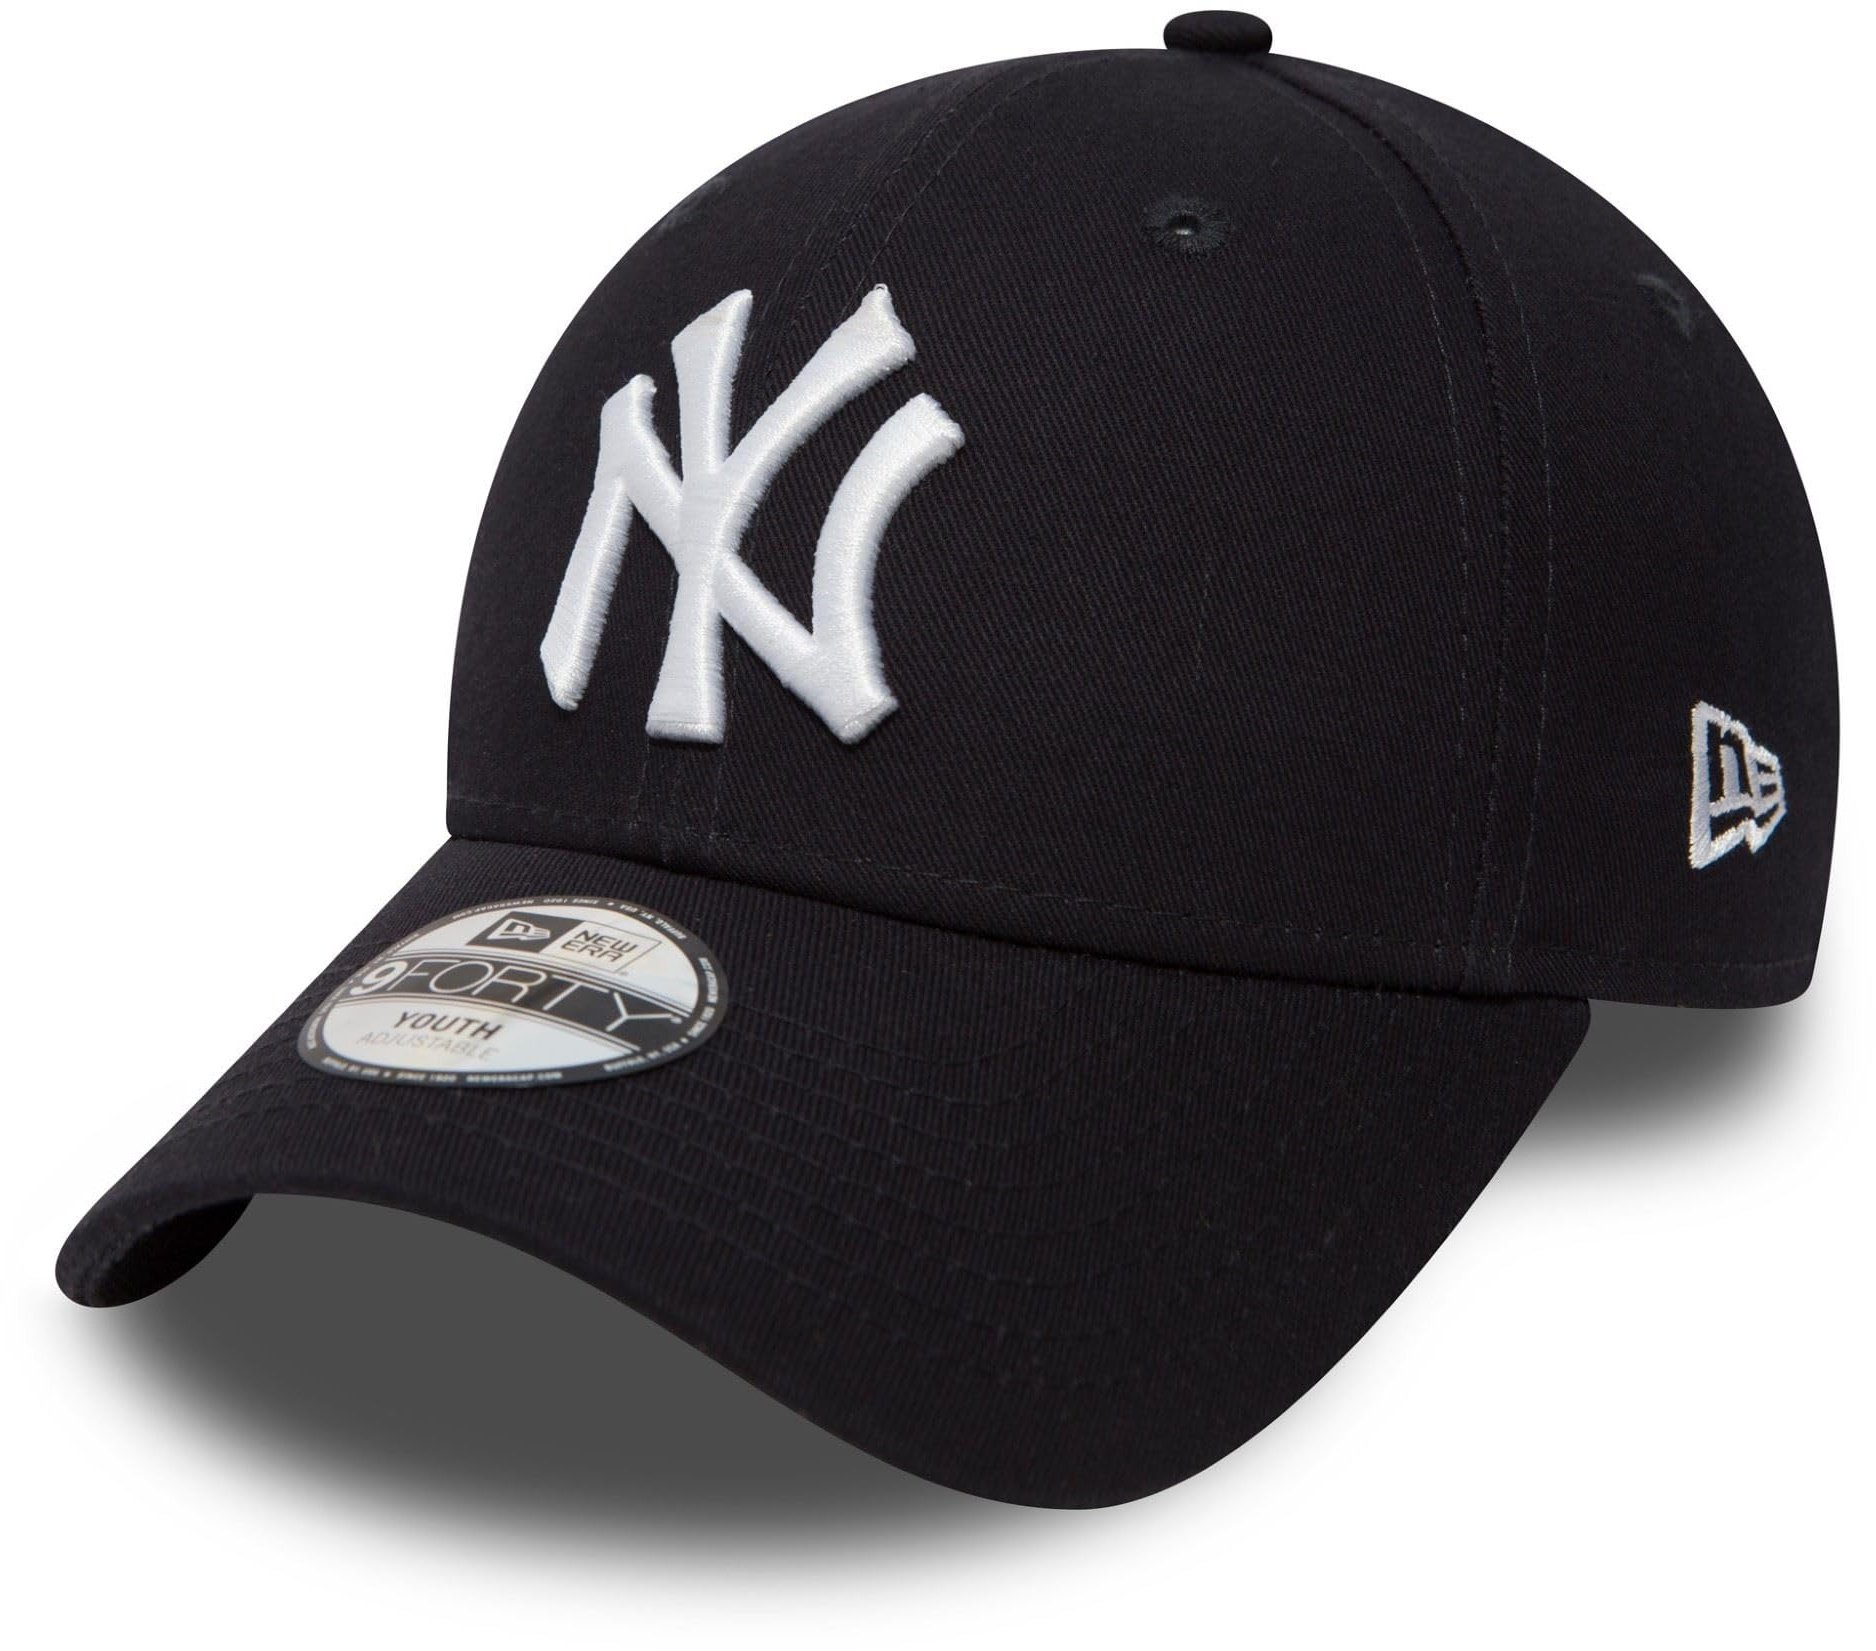 New Era New York Yankees MLB League Navy 9Forty Adjustable Youth Cap - Child